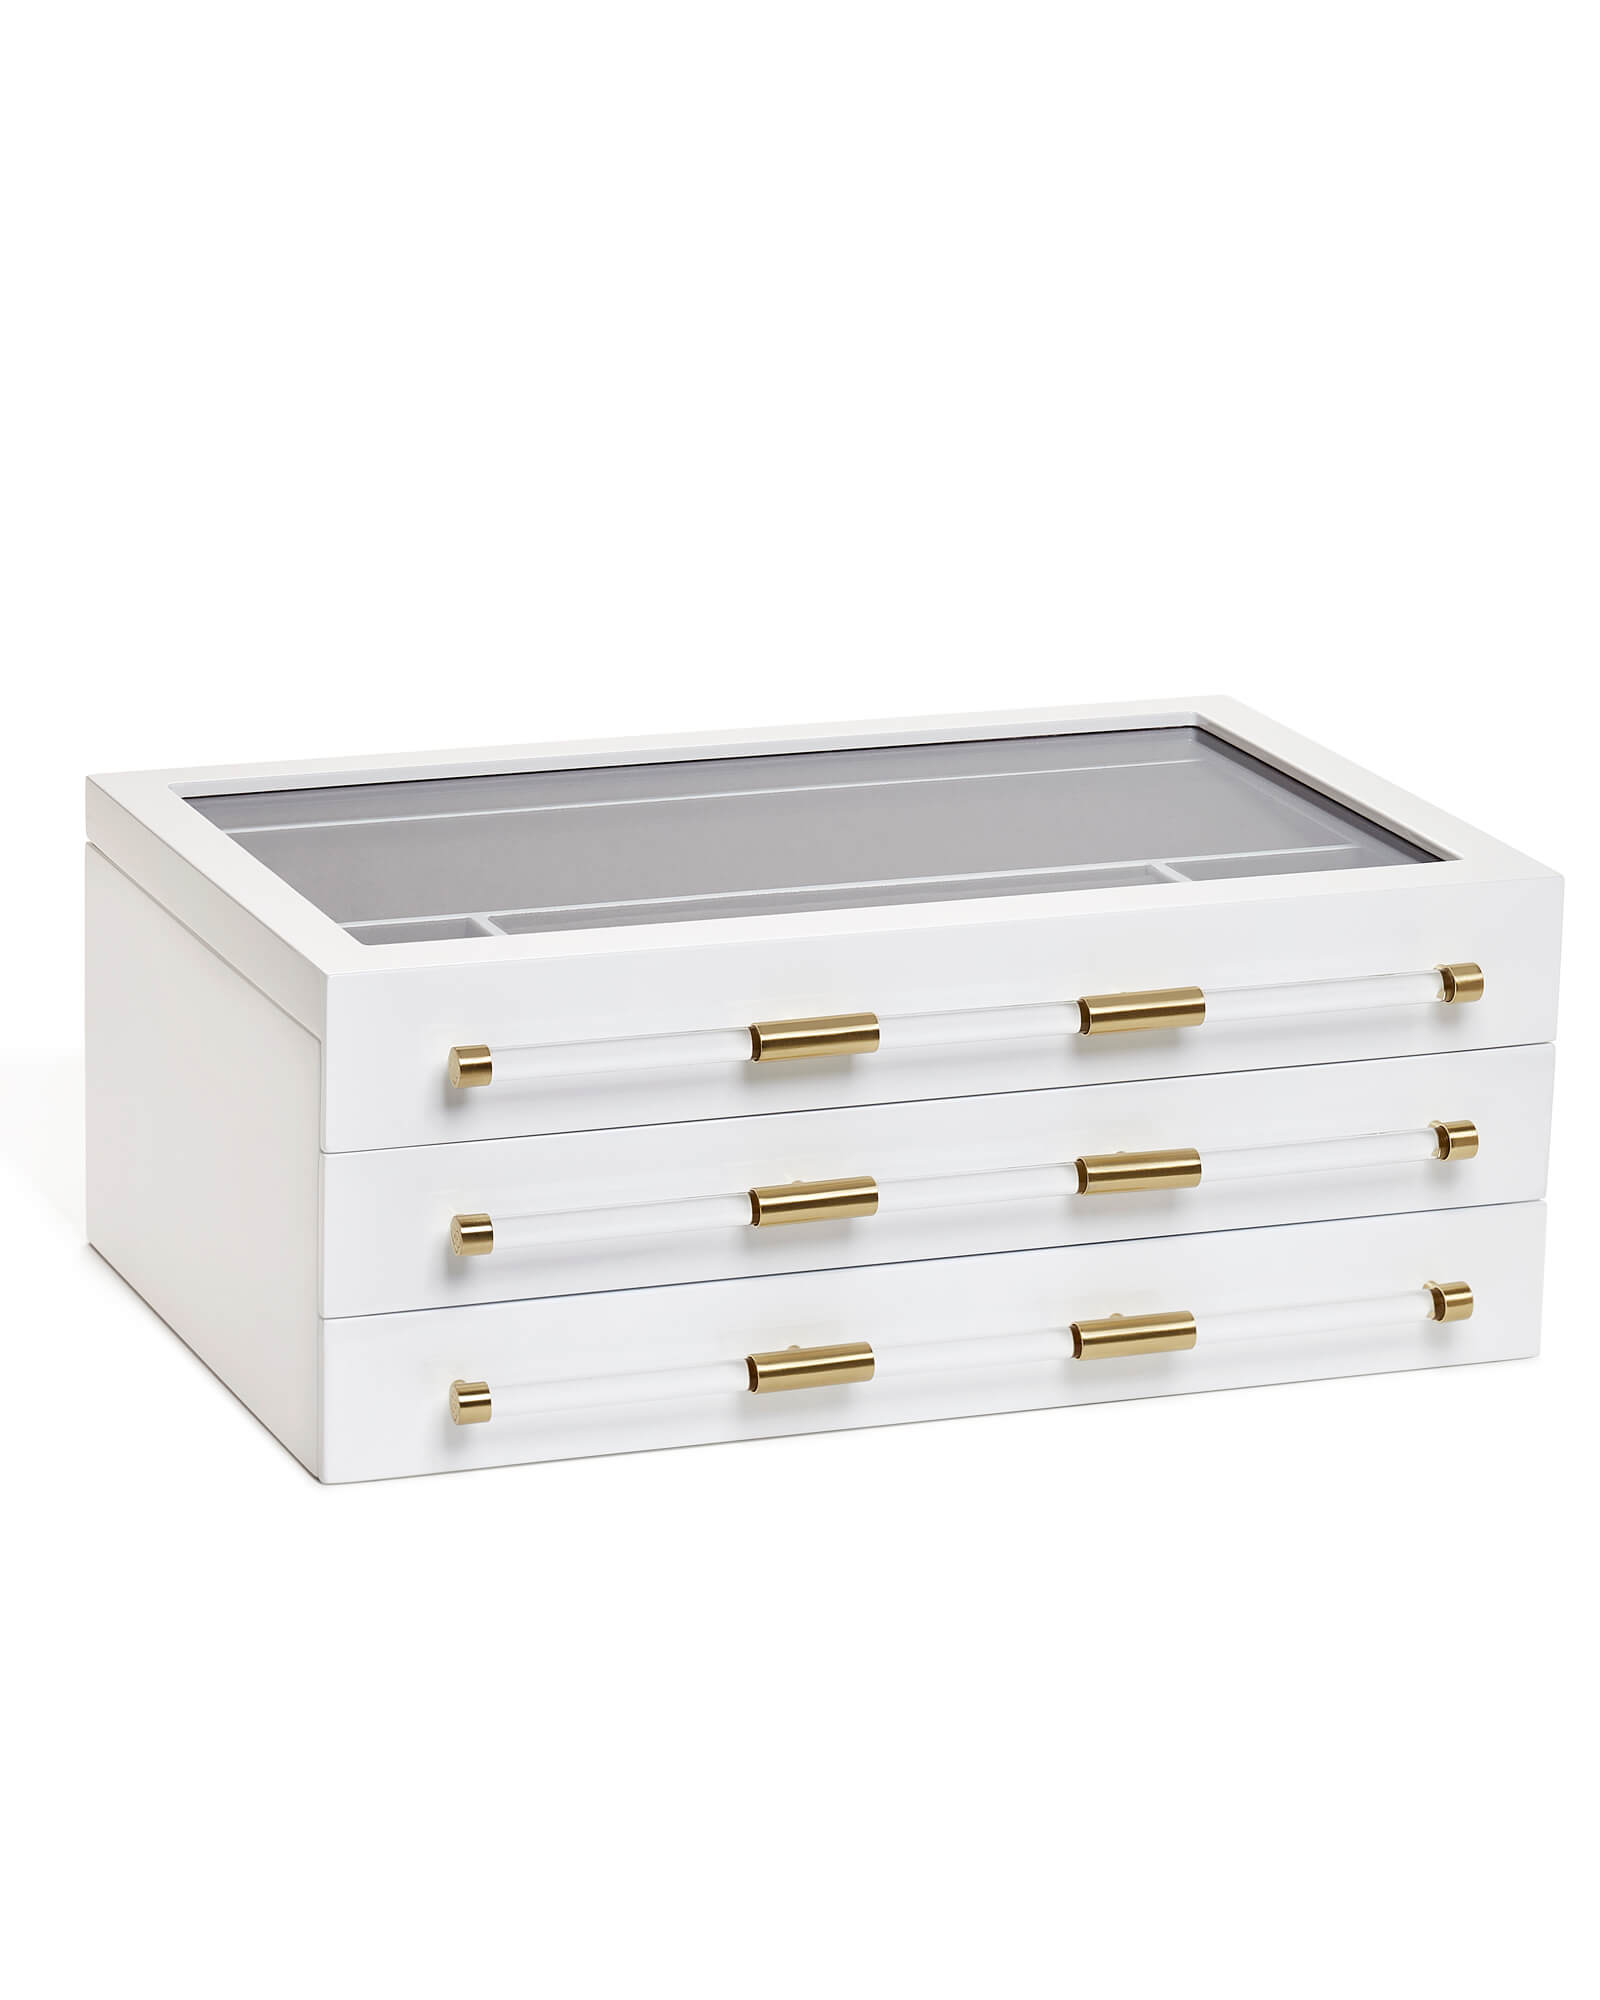 Top Quality White Hot-Sale Small Paper Jewelry Box Hardware